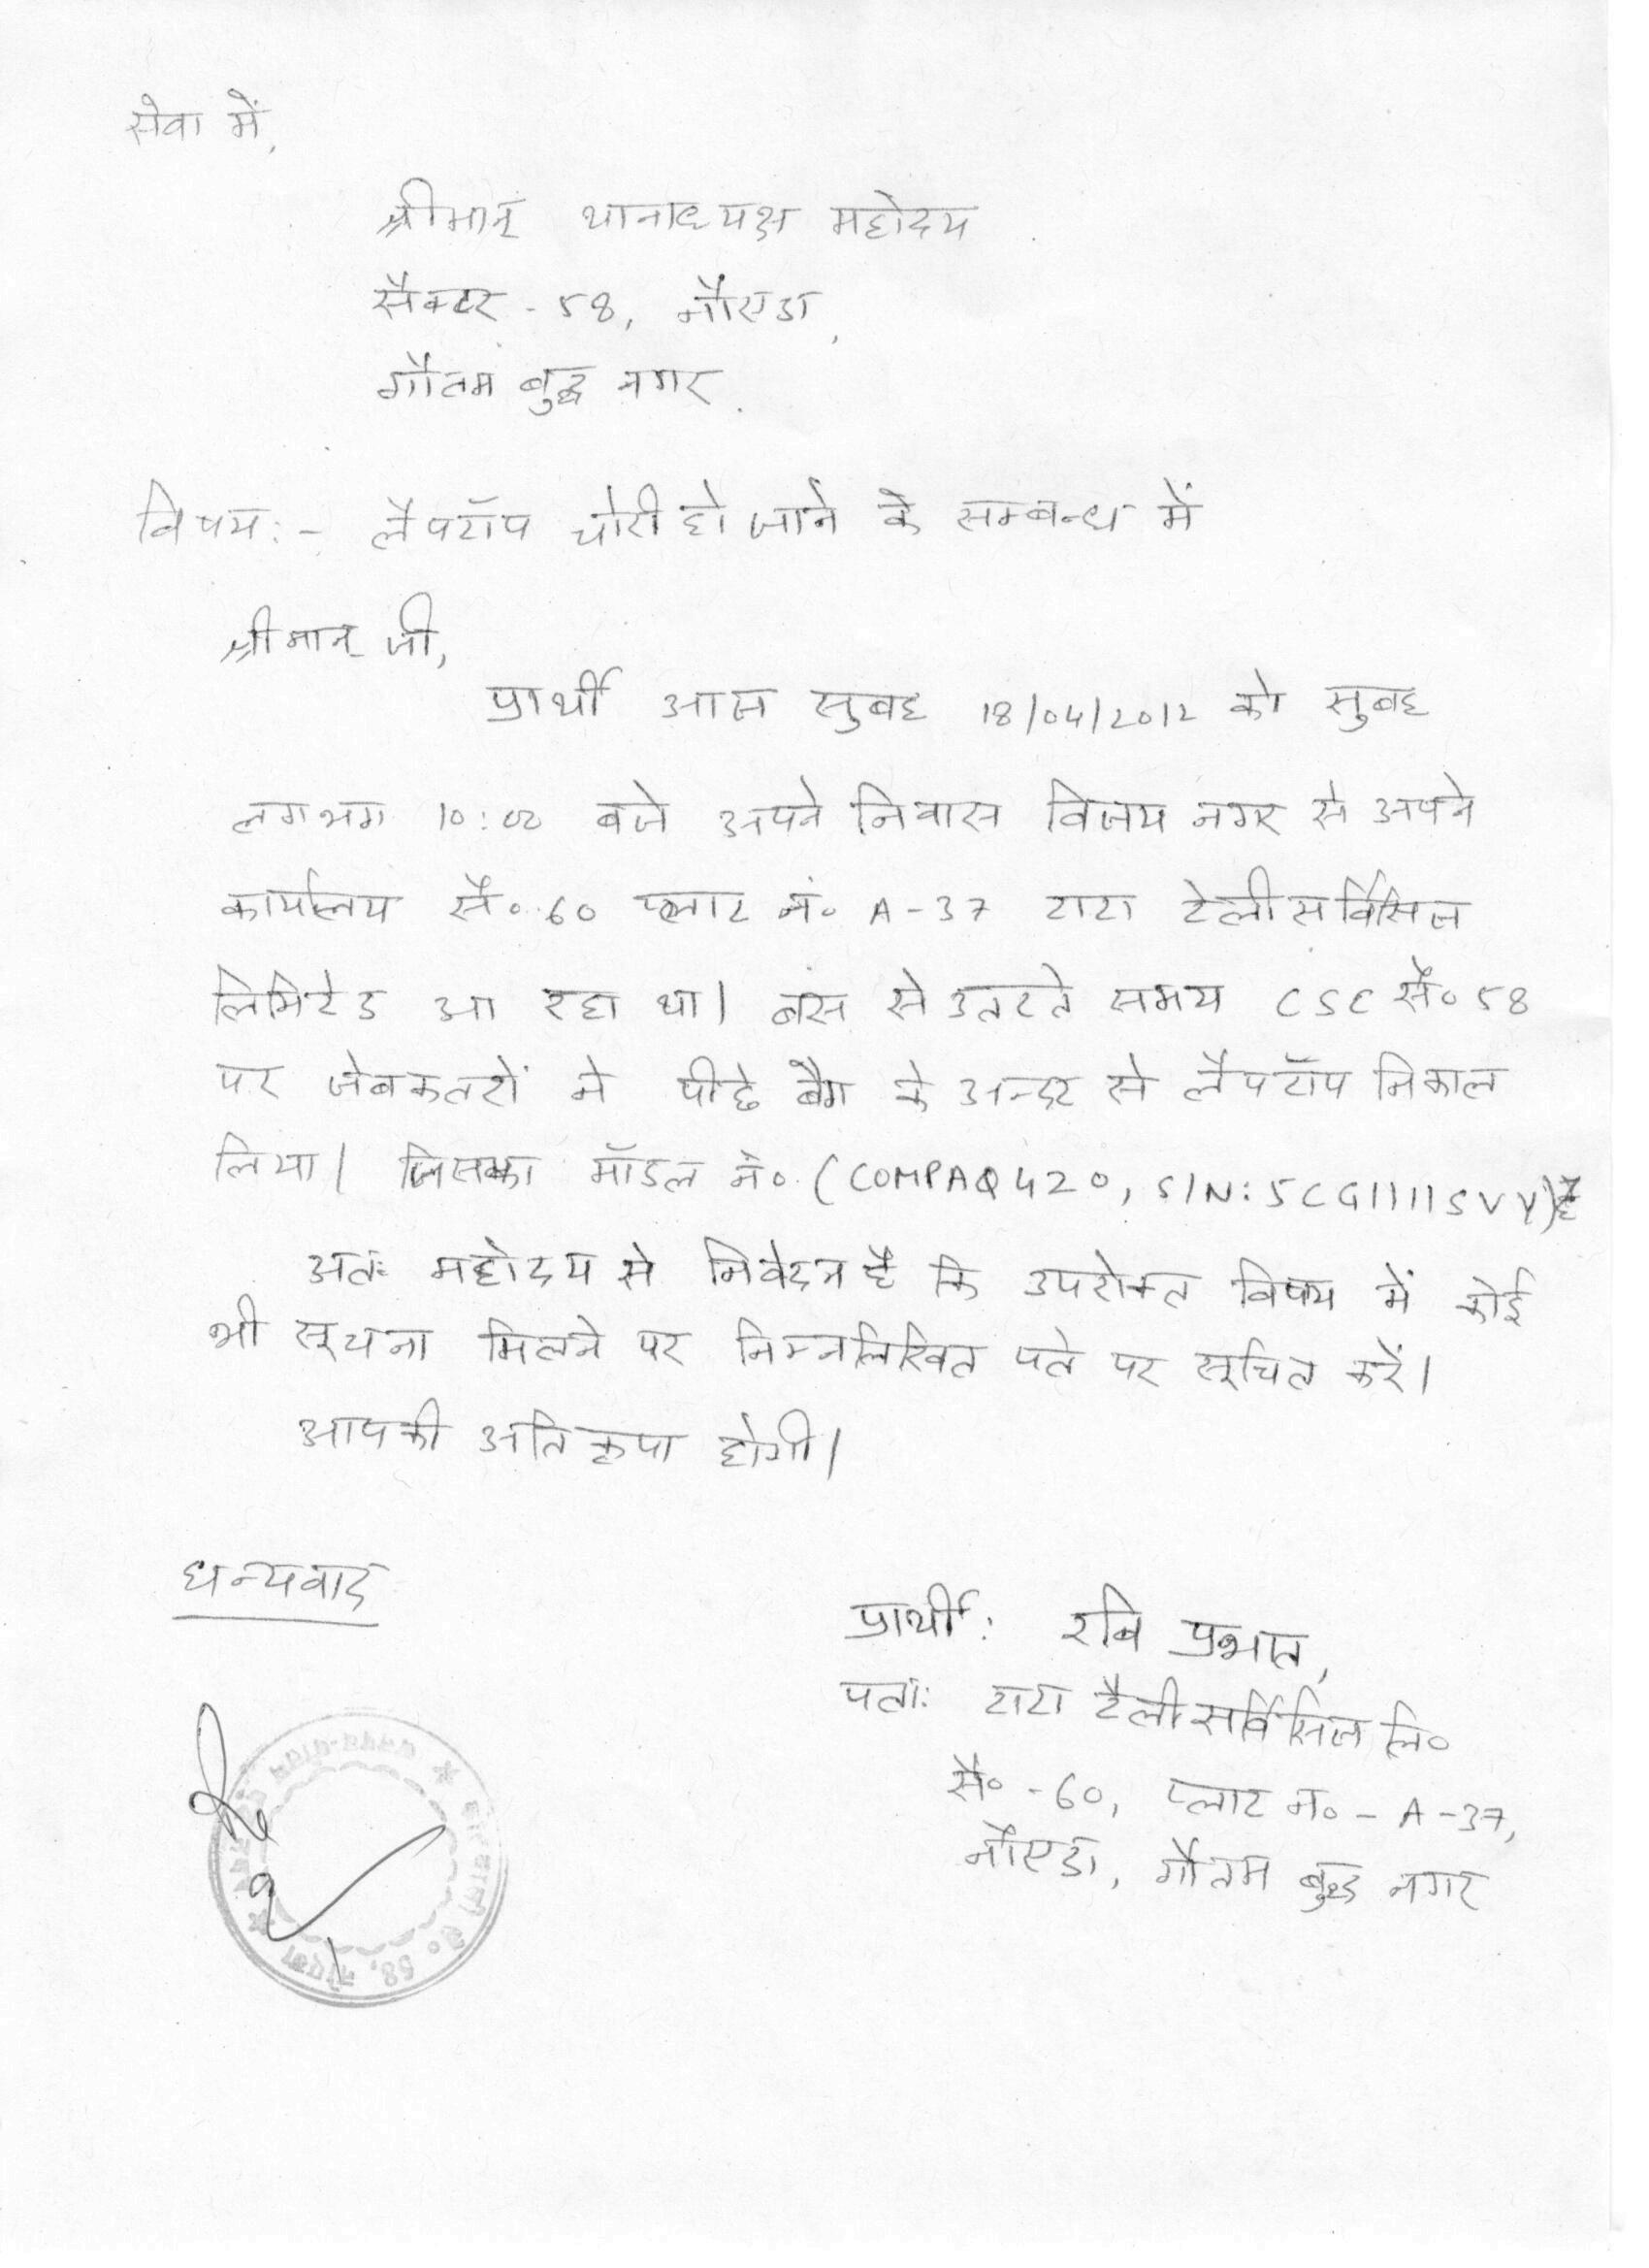 Laptop theft FIR is not being lodges by Noida Police